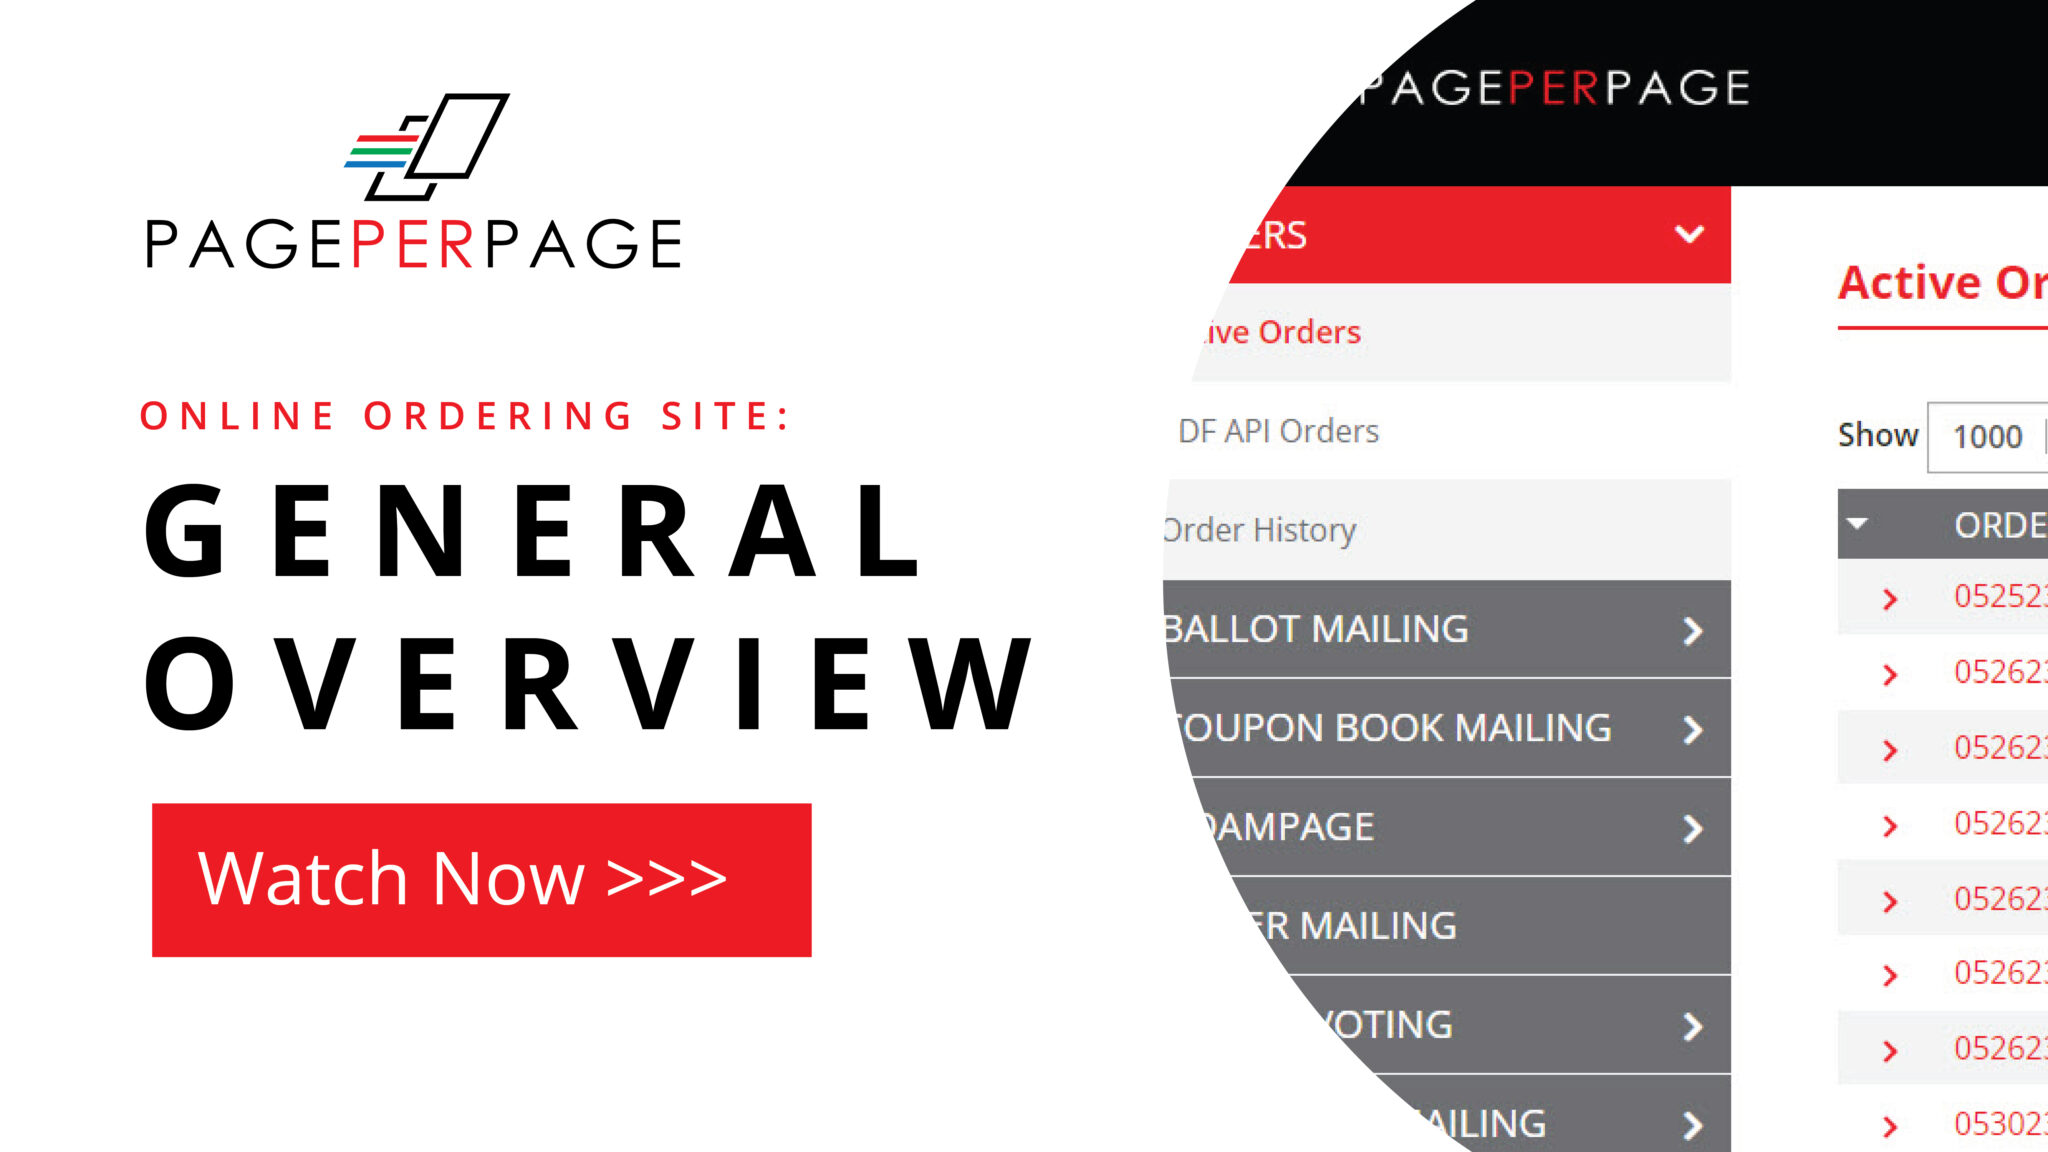 Online ordering site General Overview